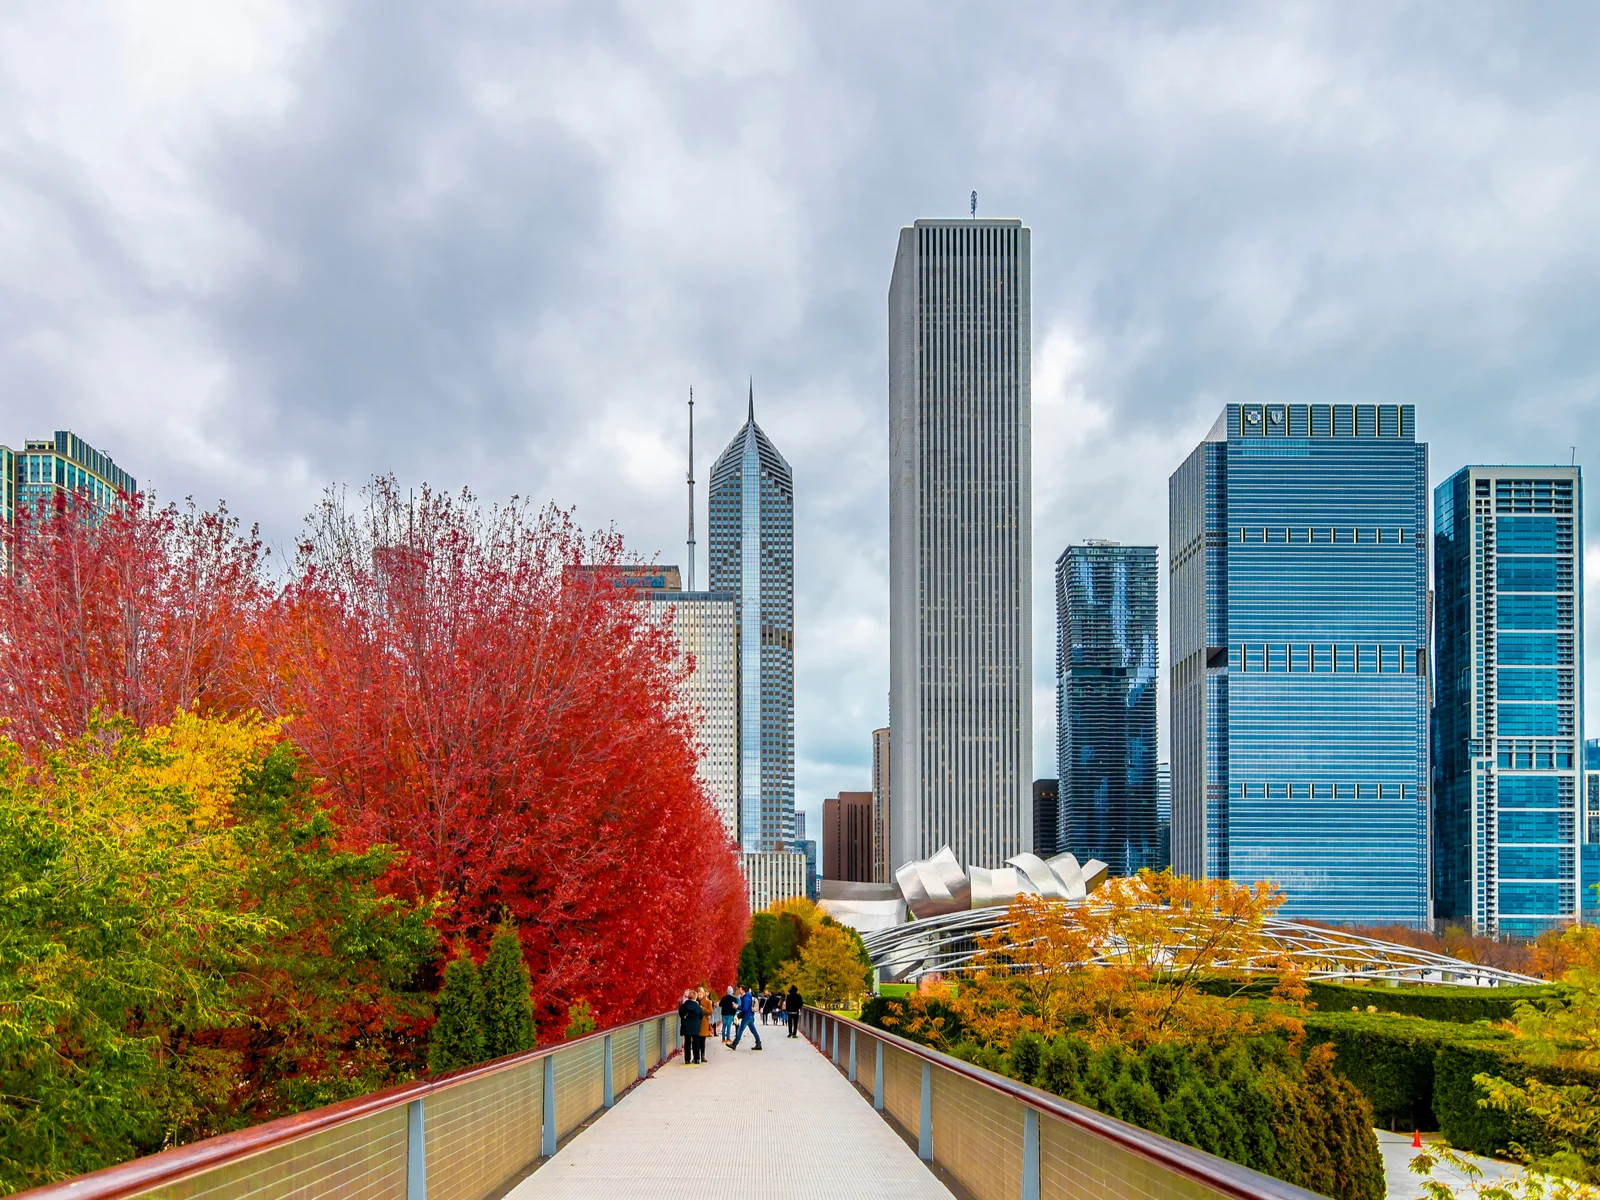 Pretty view of the Chicago skyline in the fall, one of the best times to visit Chicago